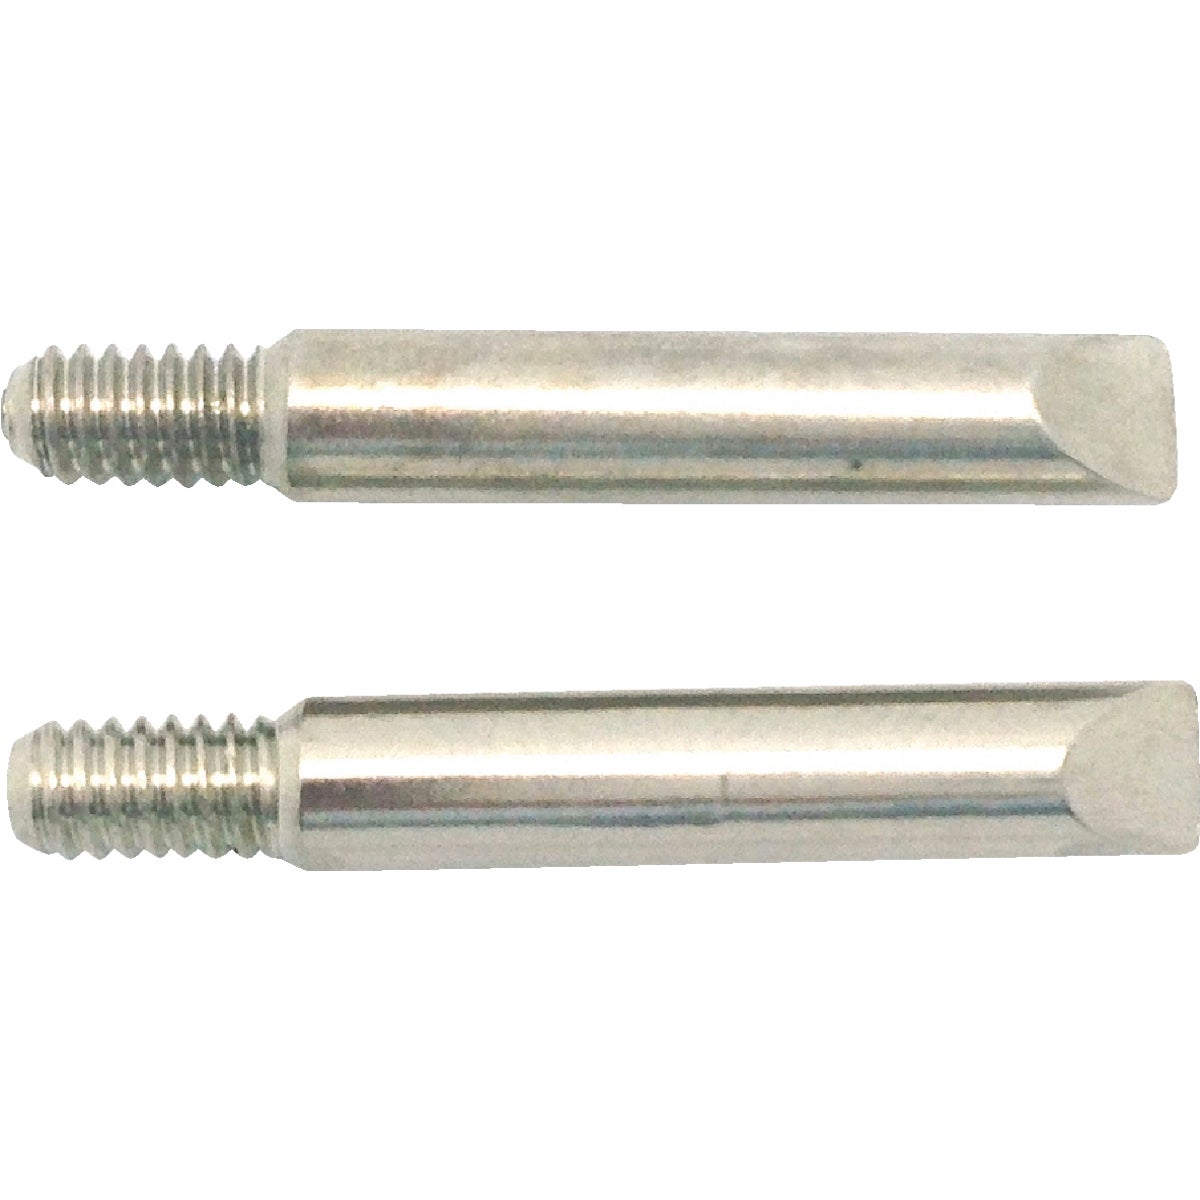 Wall Lenk 0.156 In. Soldering Iron Chisel Tip (2-Pack)